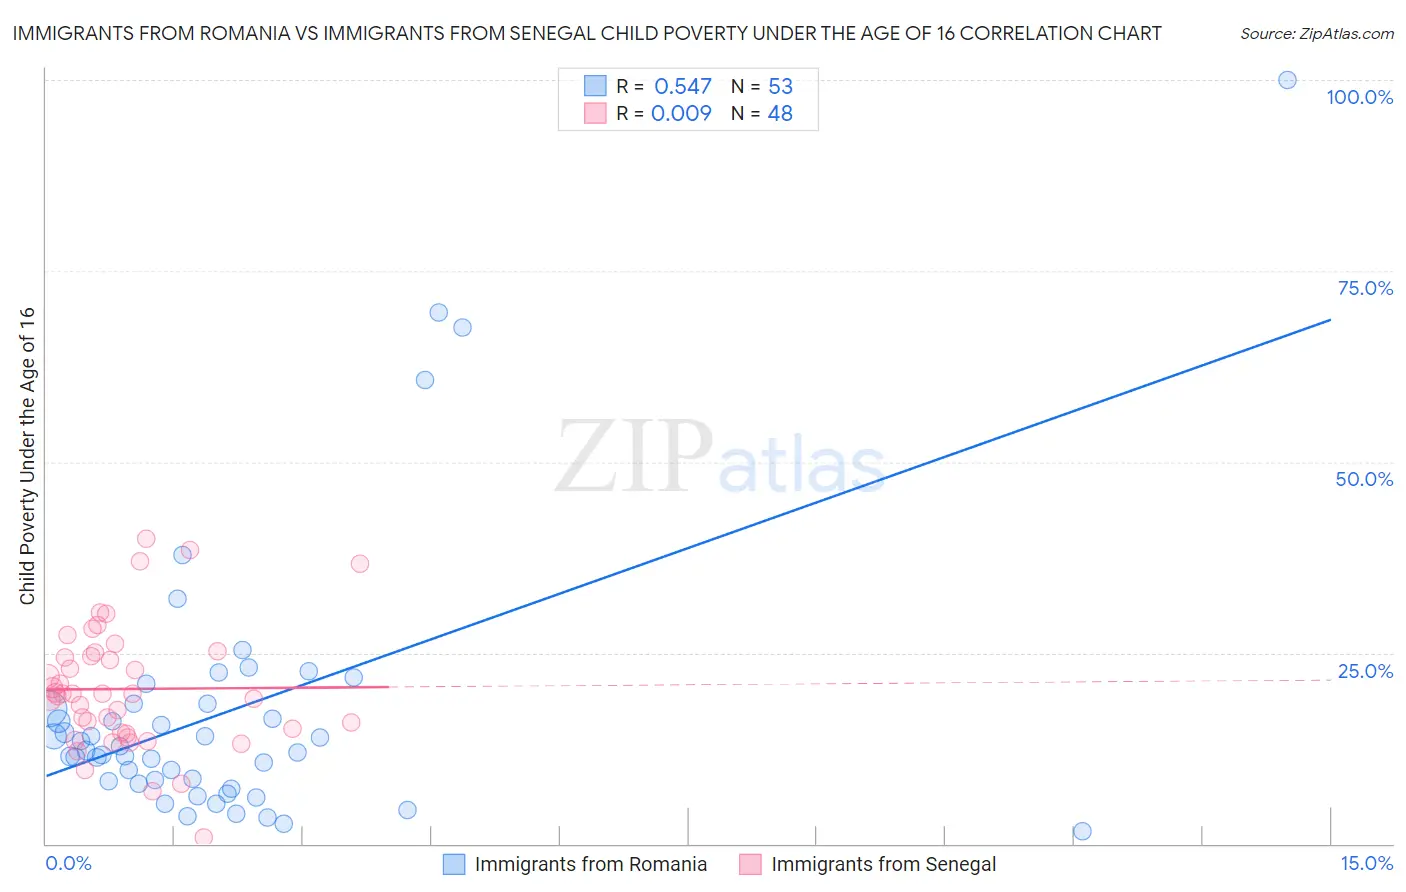 Immigrants from Romania vs Immigrants from Senegal Child Poverty Under the Age of 16